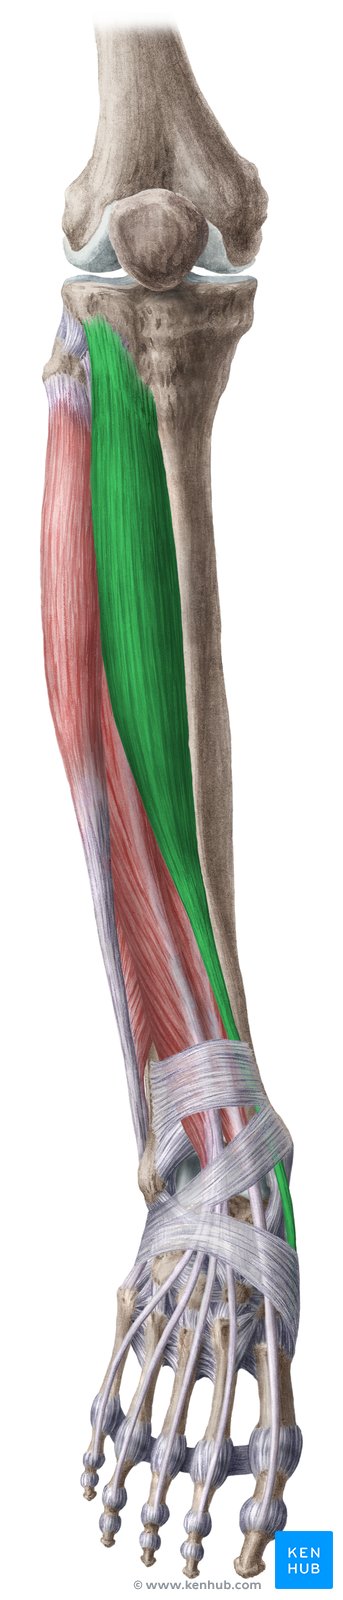 Anterior muscles of the leg: Anatomy and function | Kenhub